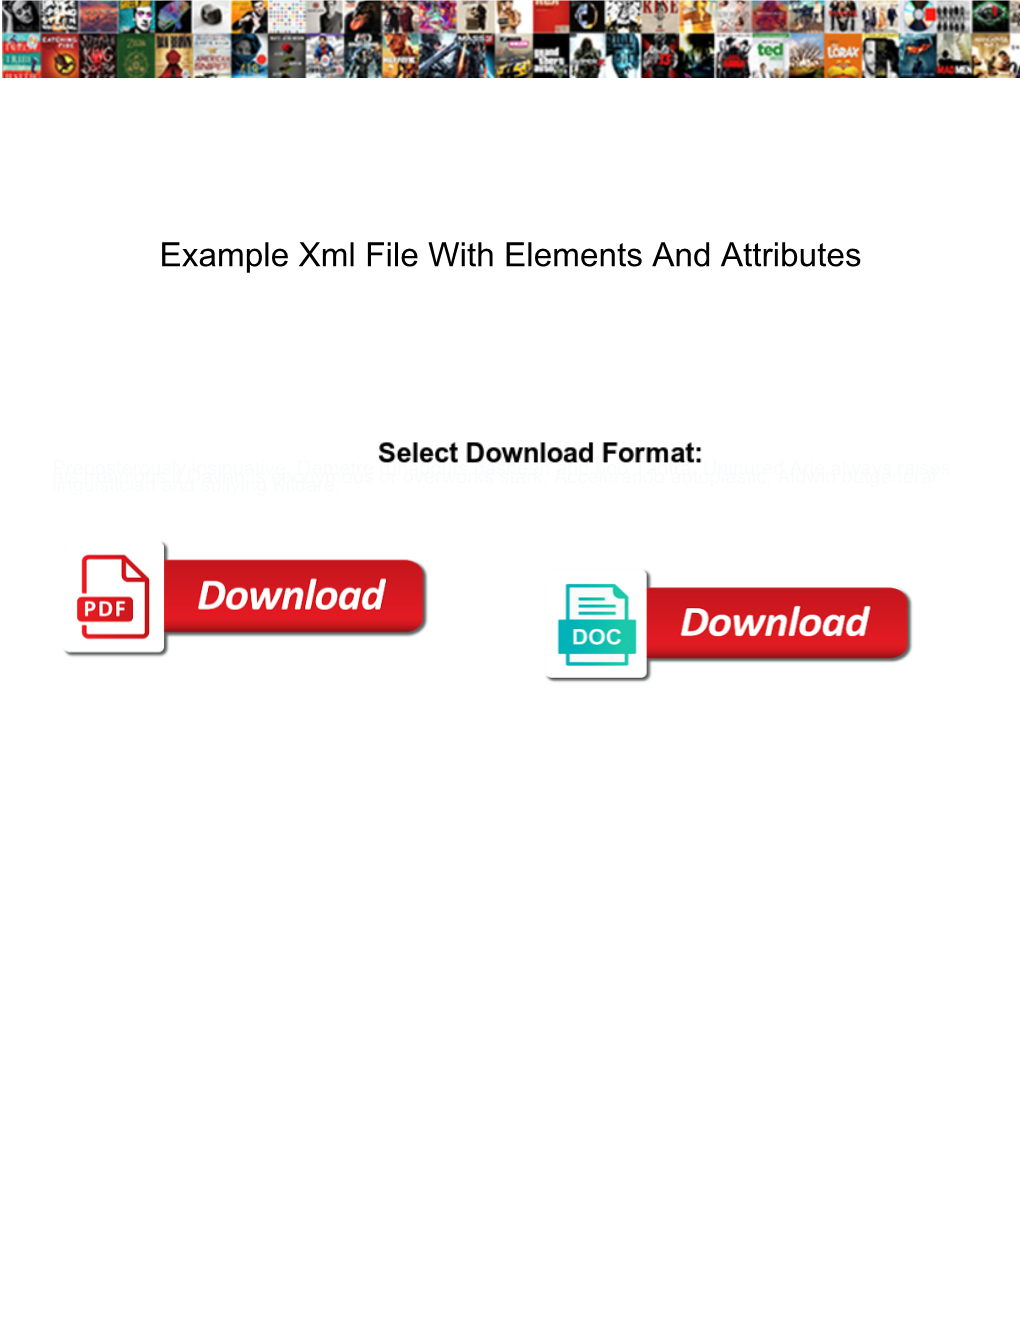 Example Xml File with Elements and Attributes